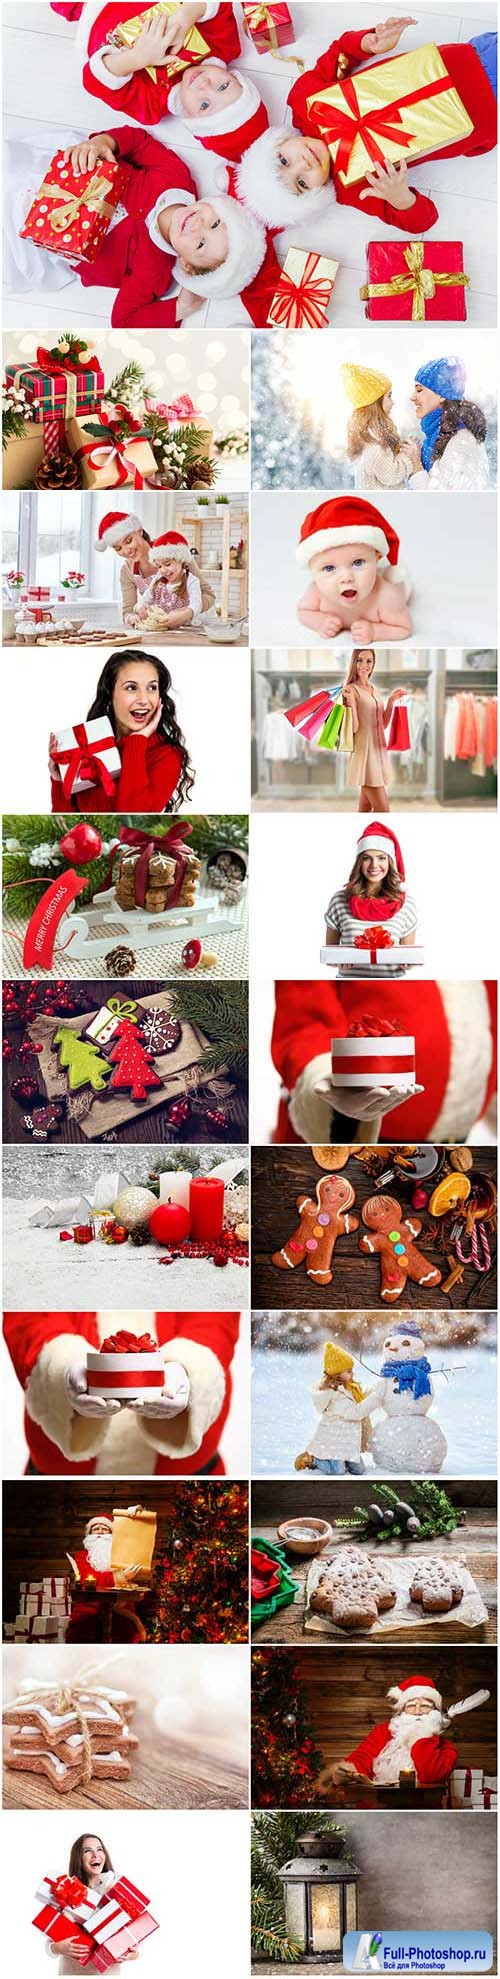 New Year and Christmas stock photos 97